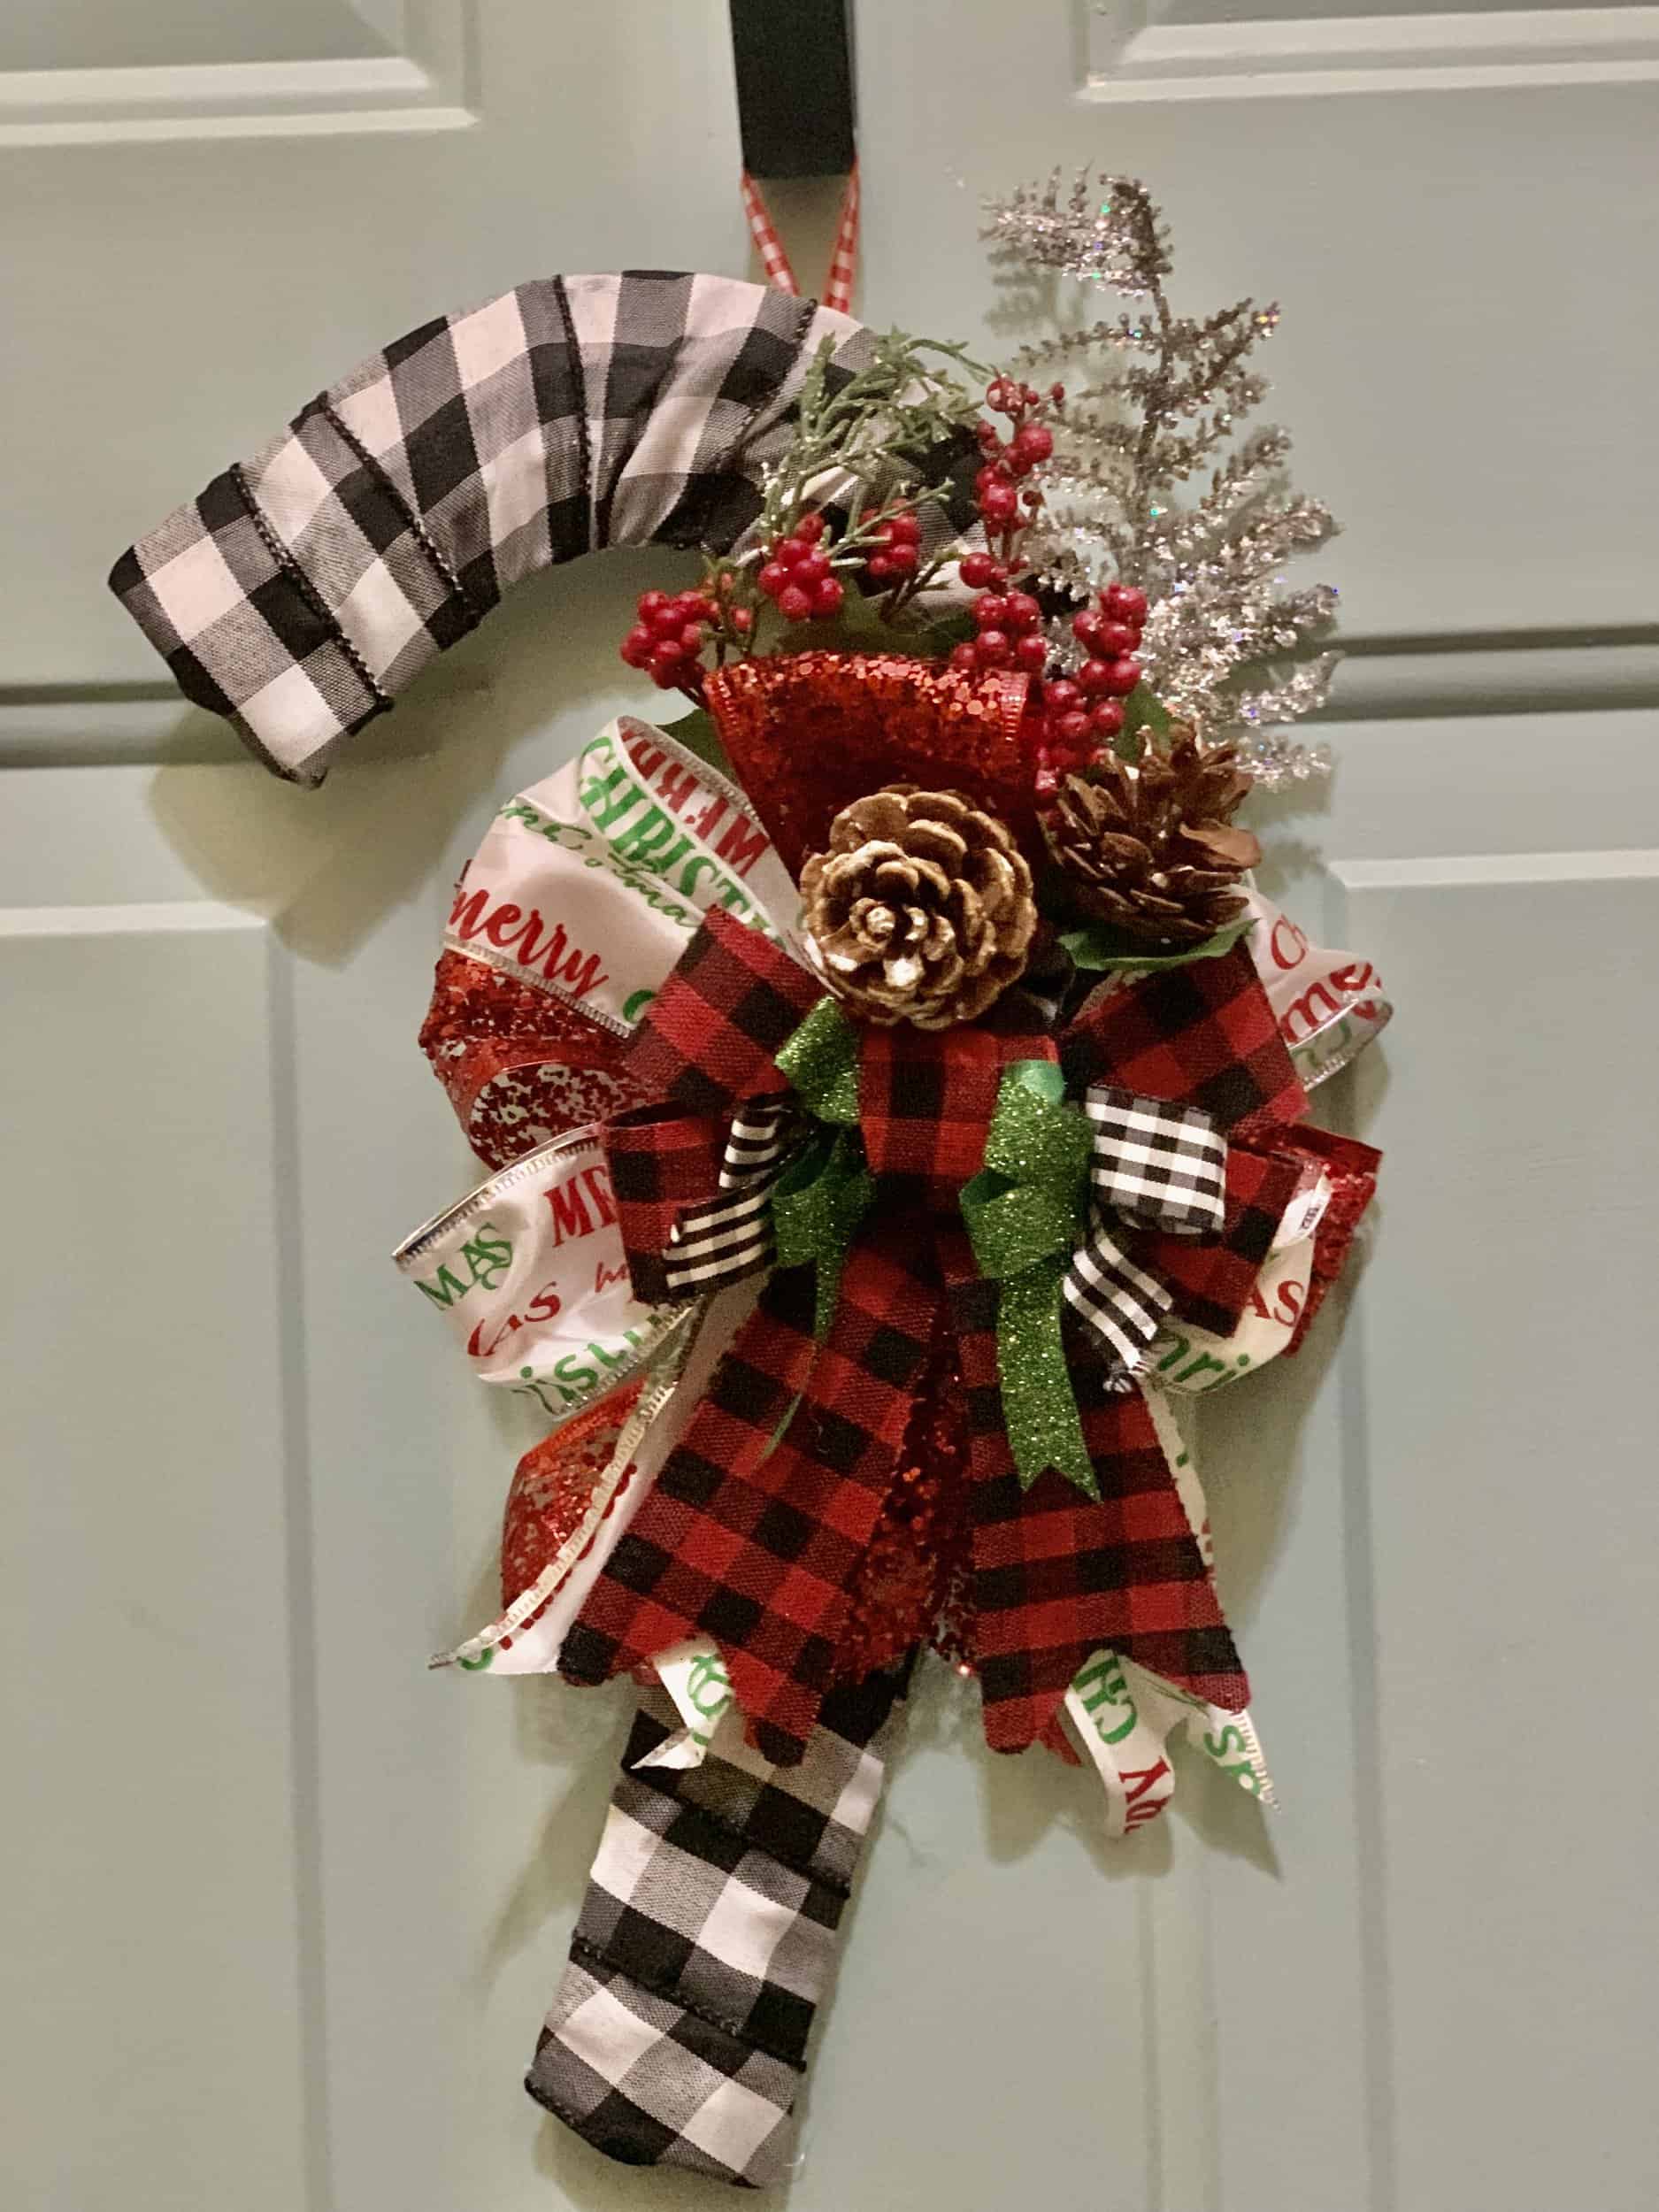 This Candy Cane Wreath is made with love by Willow Chic Designs! Shop more unique gift ideas today with Spots Initiatives, the best way to support creators.